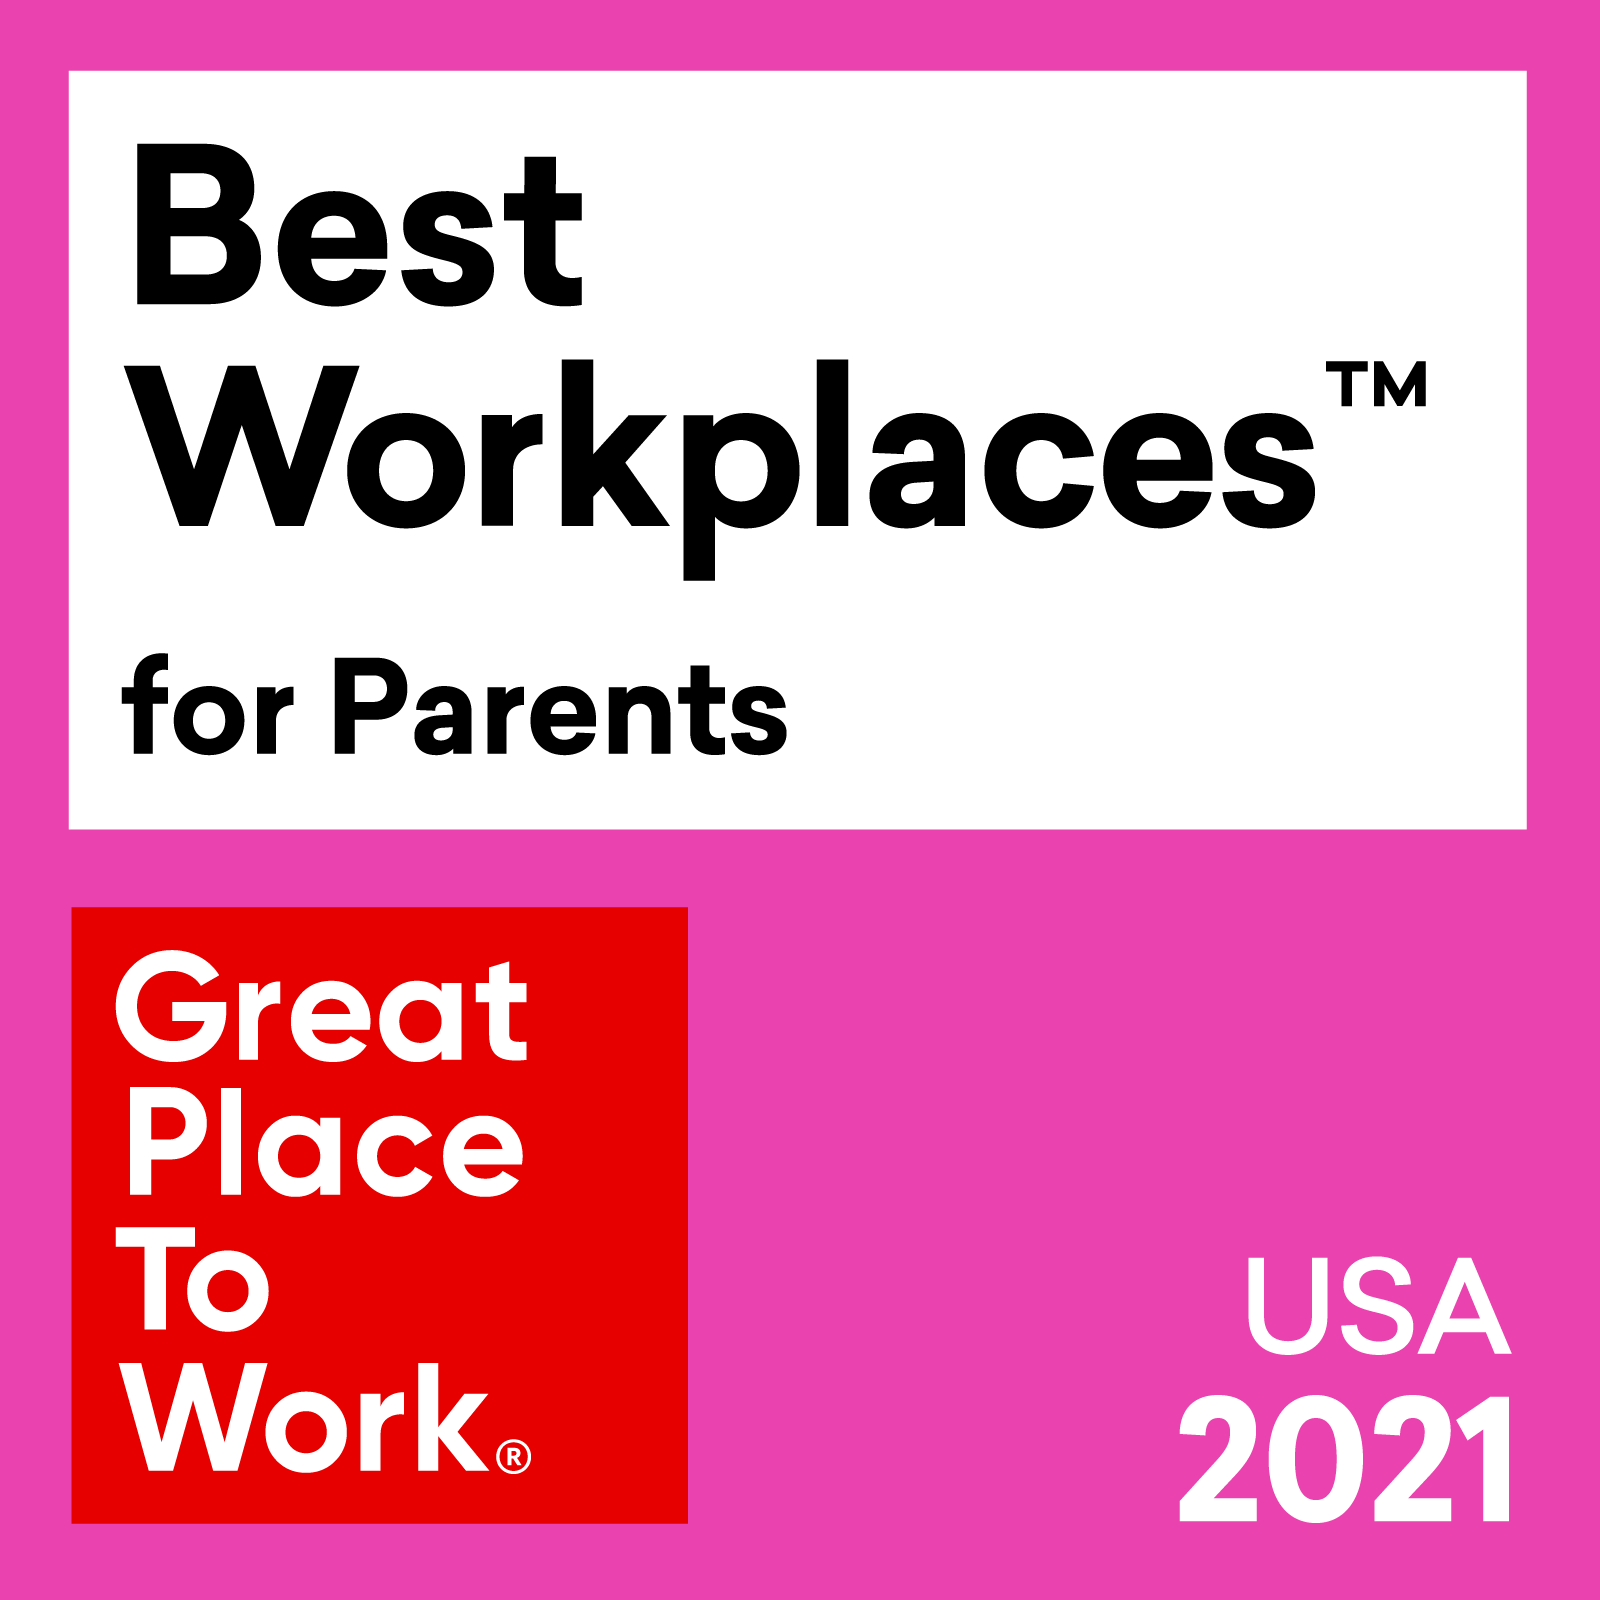 Best Workplaces™️ for Parents - USA 2021 award from Great Place To Work